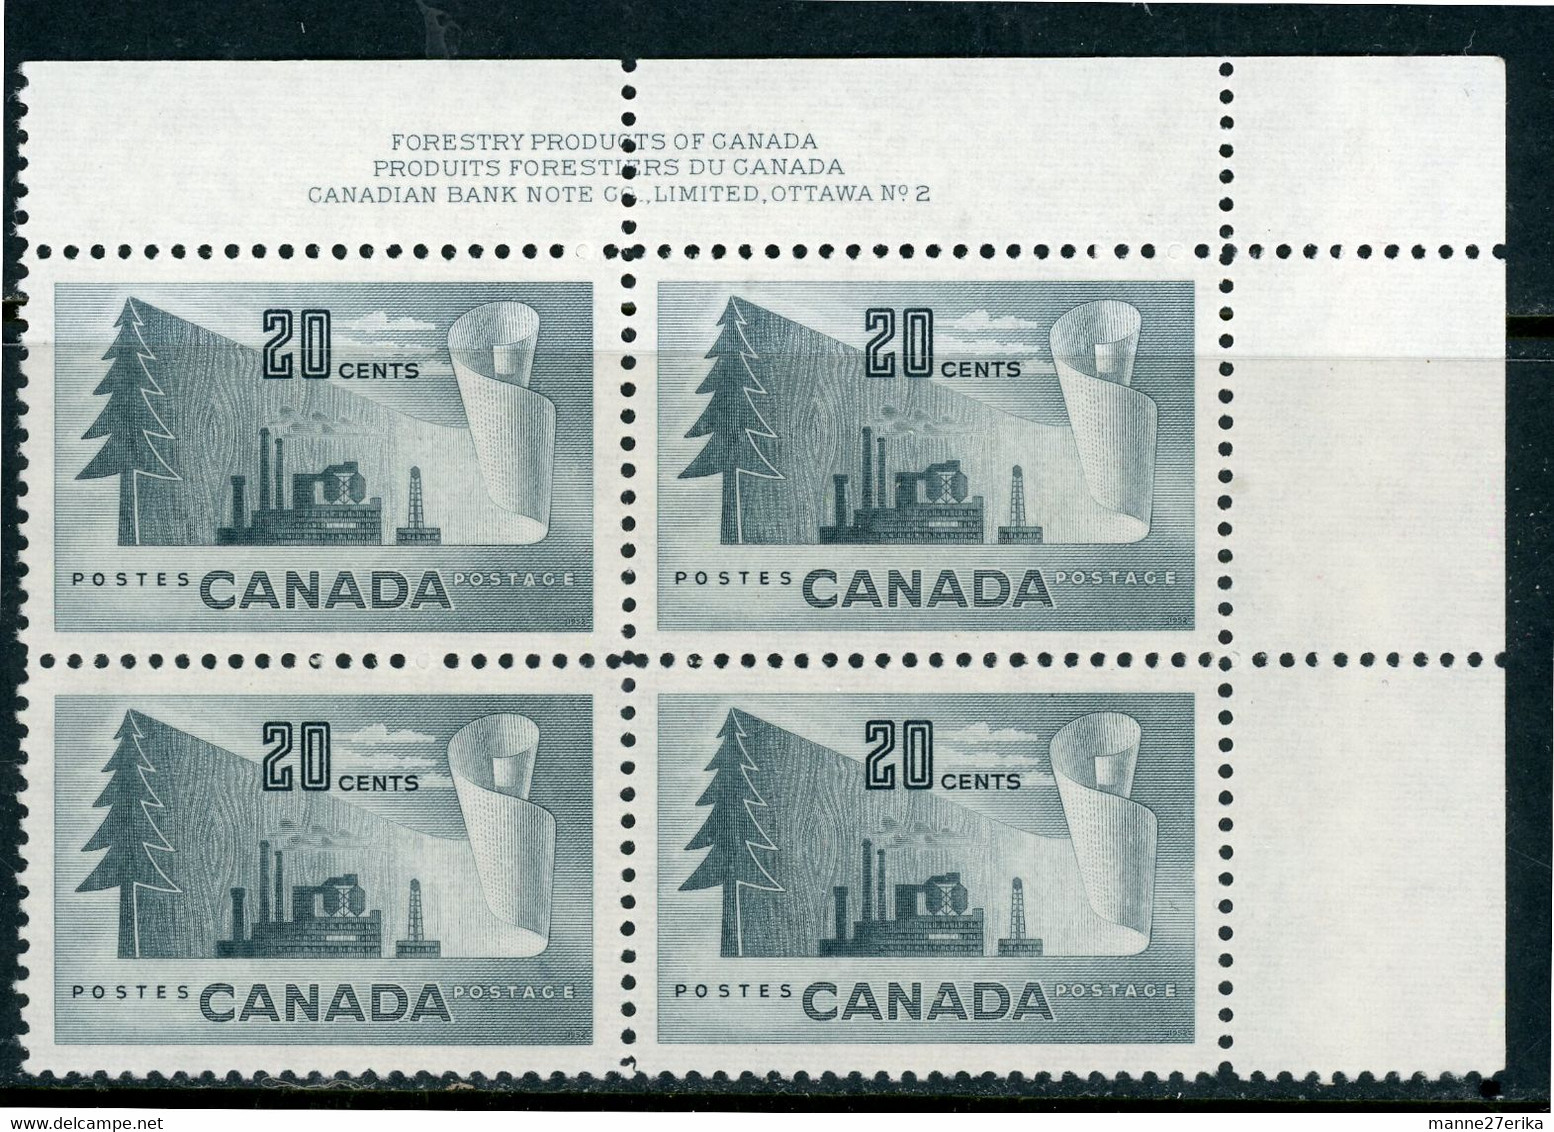 -Canada -1952-"Forest Products"- MNH (**) Plate Block - Plate Number & Inscriptions